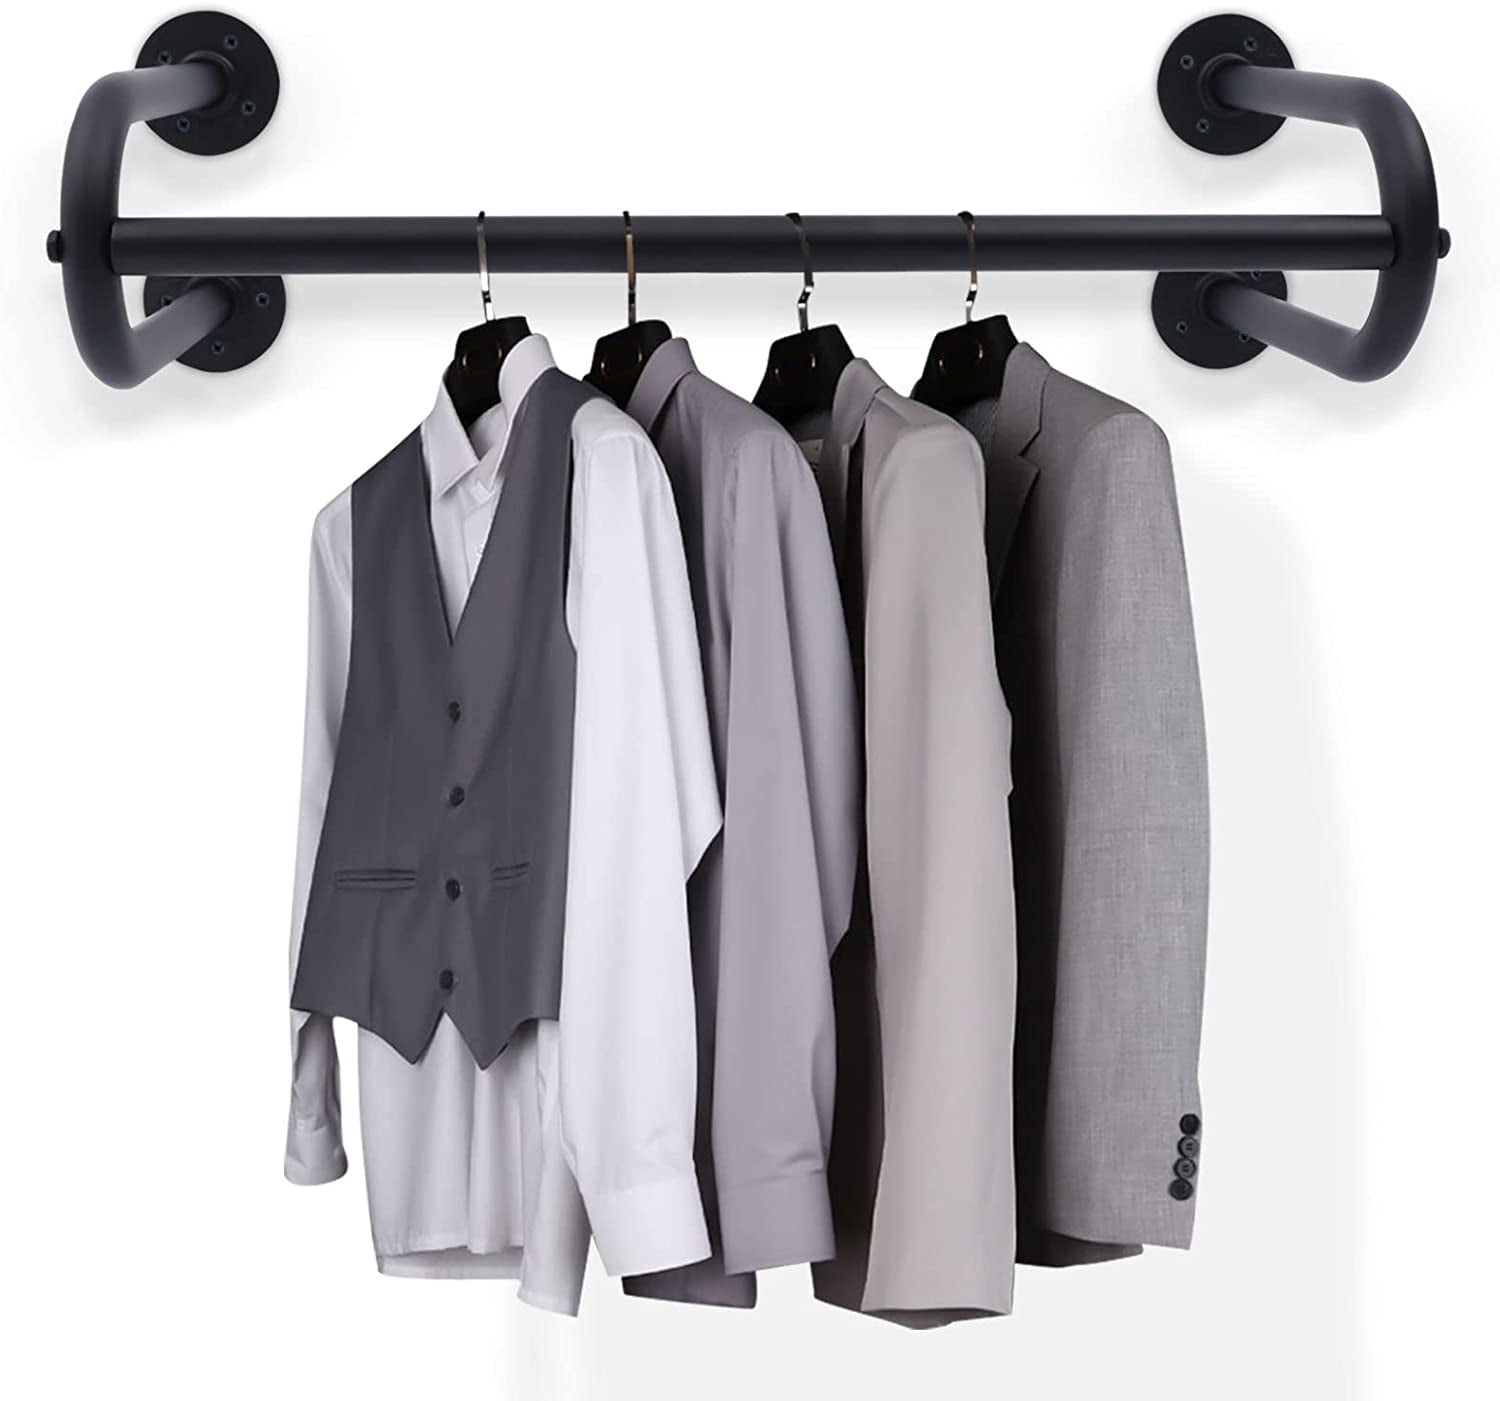 Miumaeov Wall Mounted Clothes Rack Industrial Pipe Coat Hanger Heavy ...